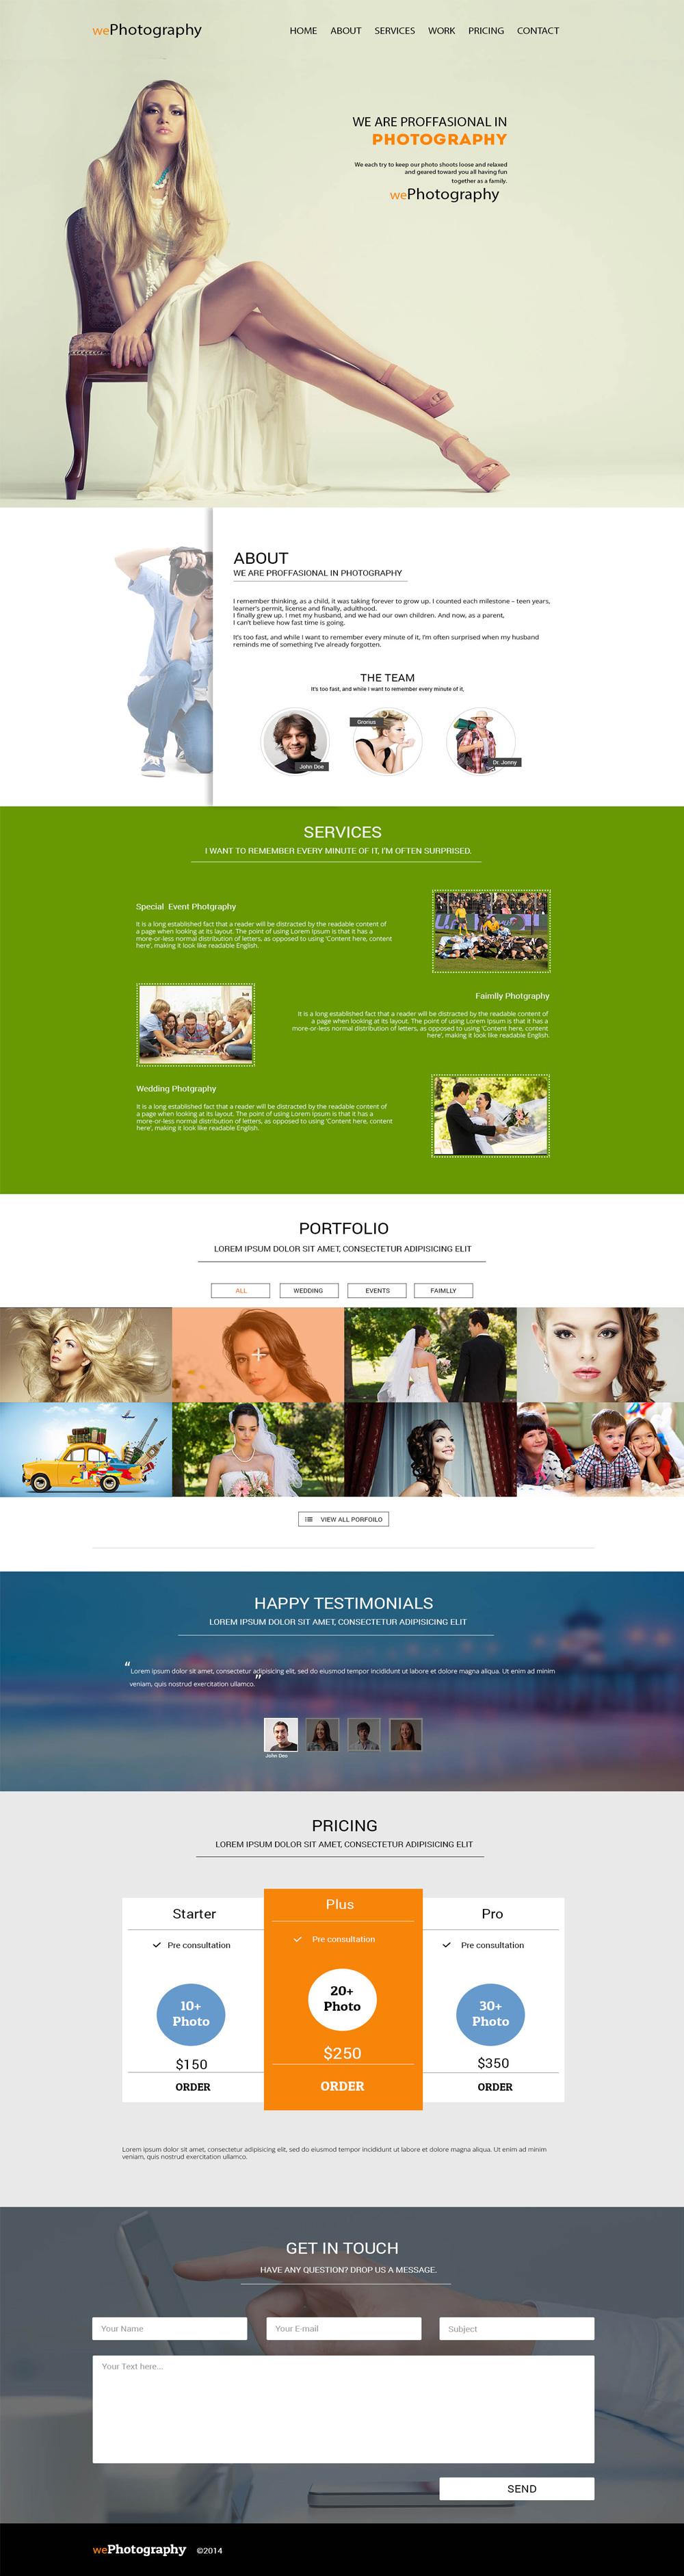 WePhotography – One Page Multipurpose Portfolio Template PSD